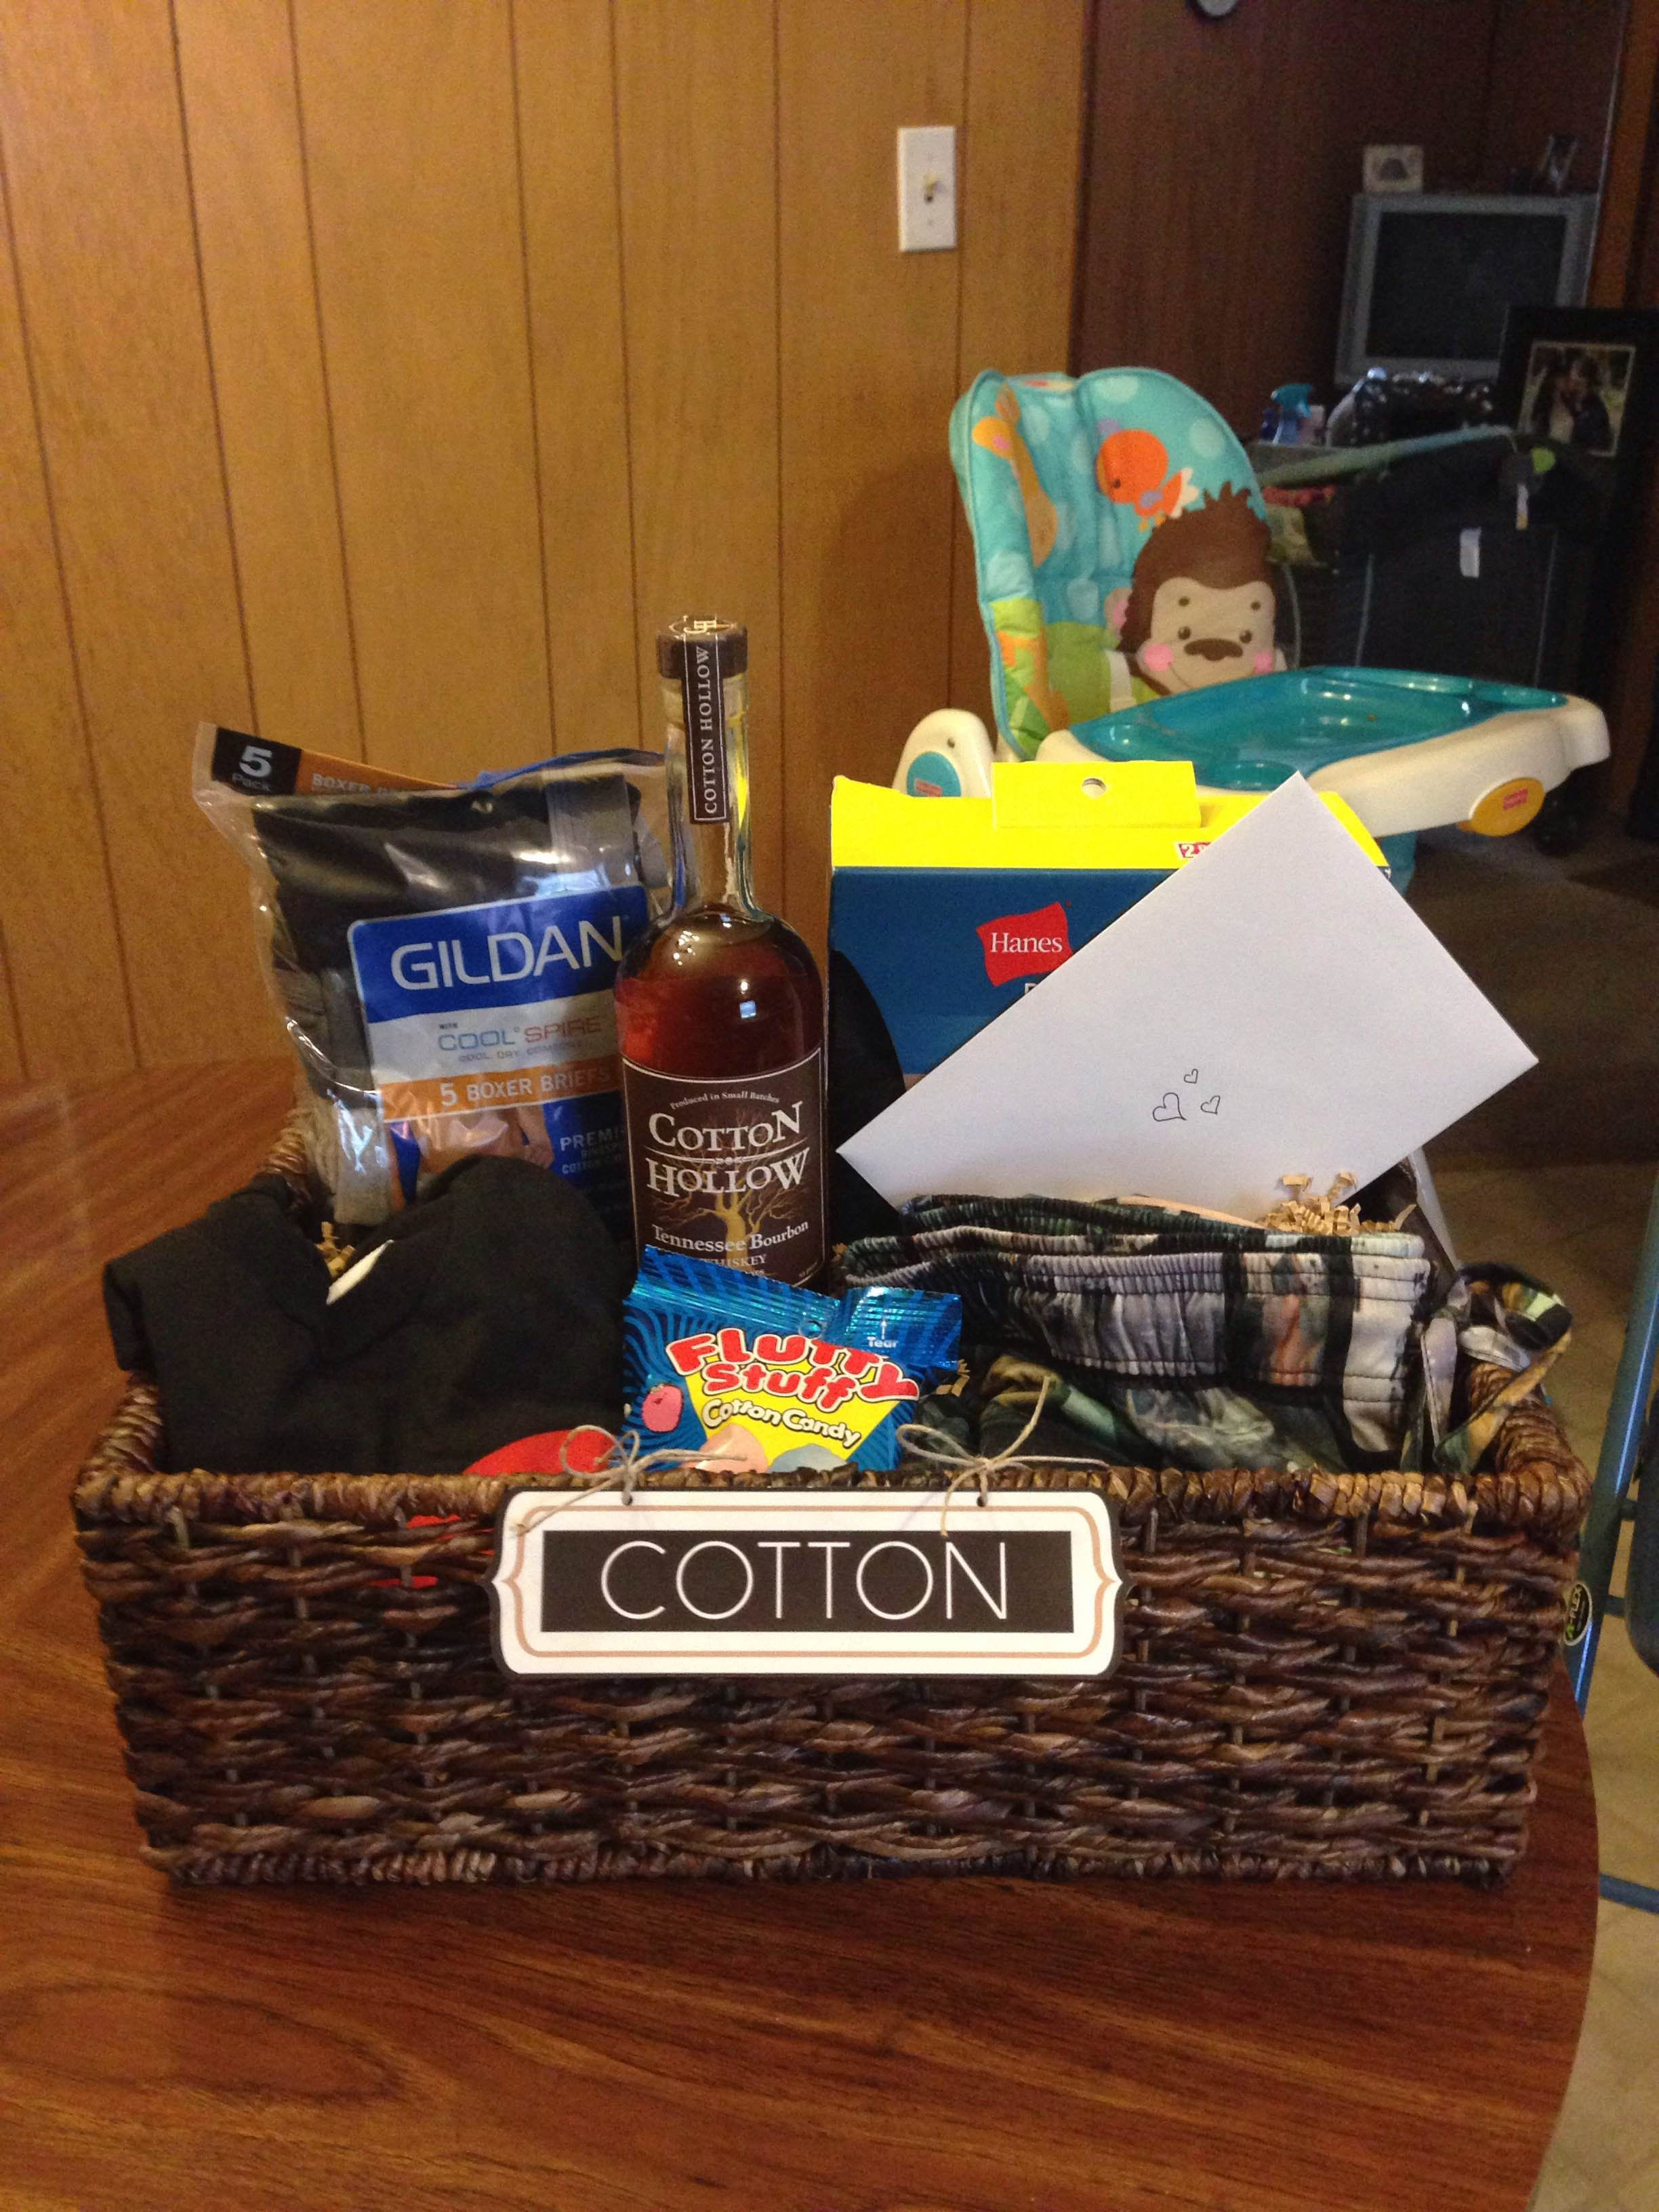 Wedding Gift Ideas For 2Nd Marriage
 "Cotton" t basket I put to her for my husband for our